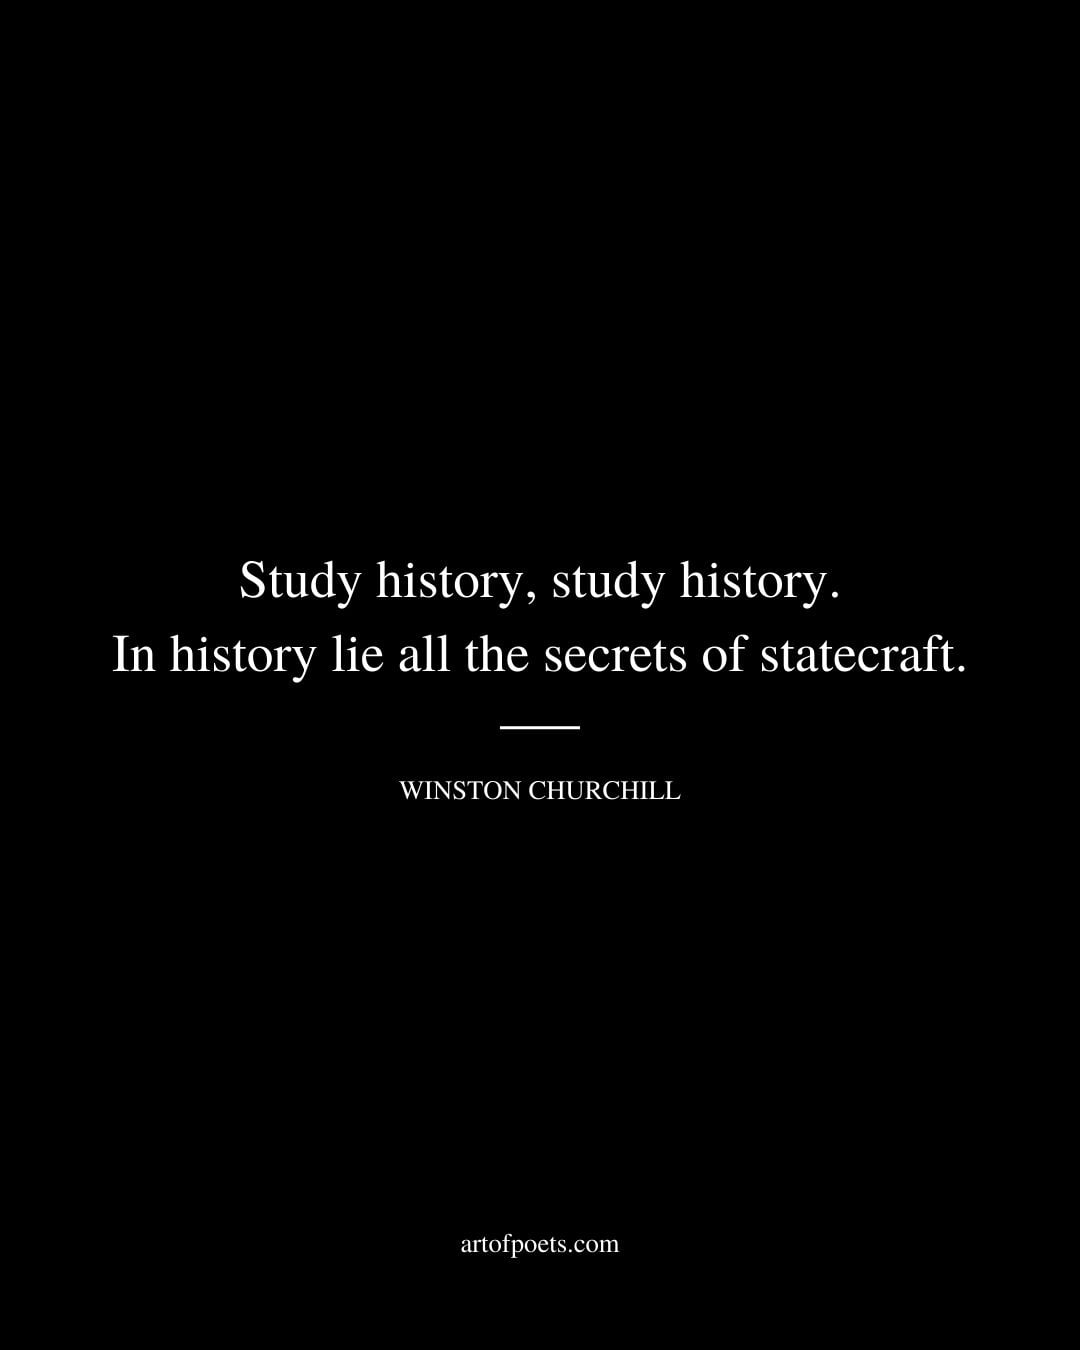 Study history study history. In history lie all the secrets of statecraft